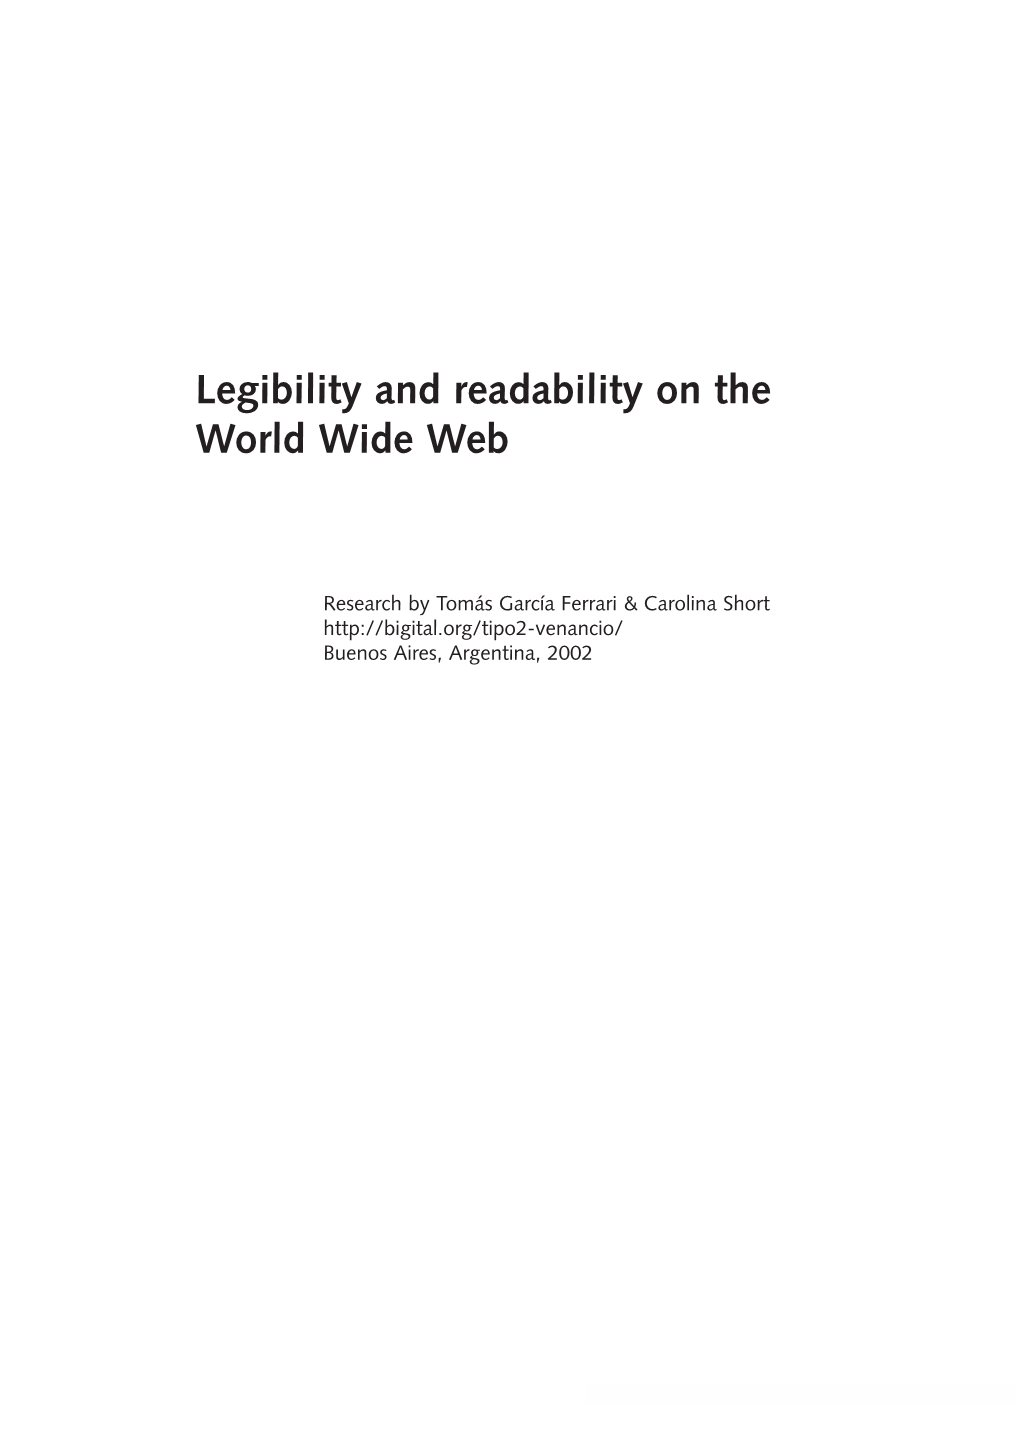 Legibility and Readability on the World Wide Web